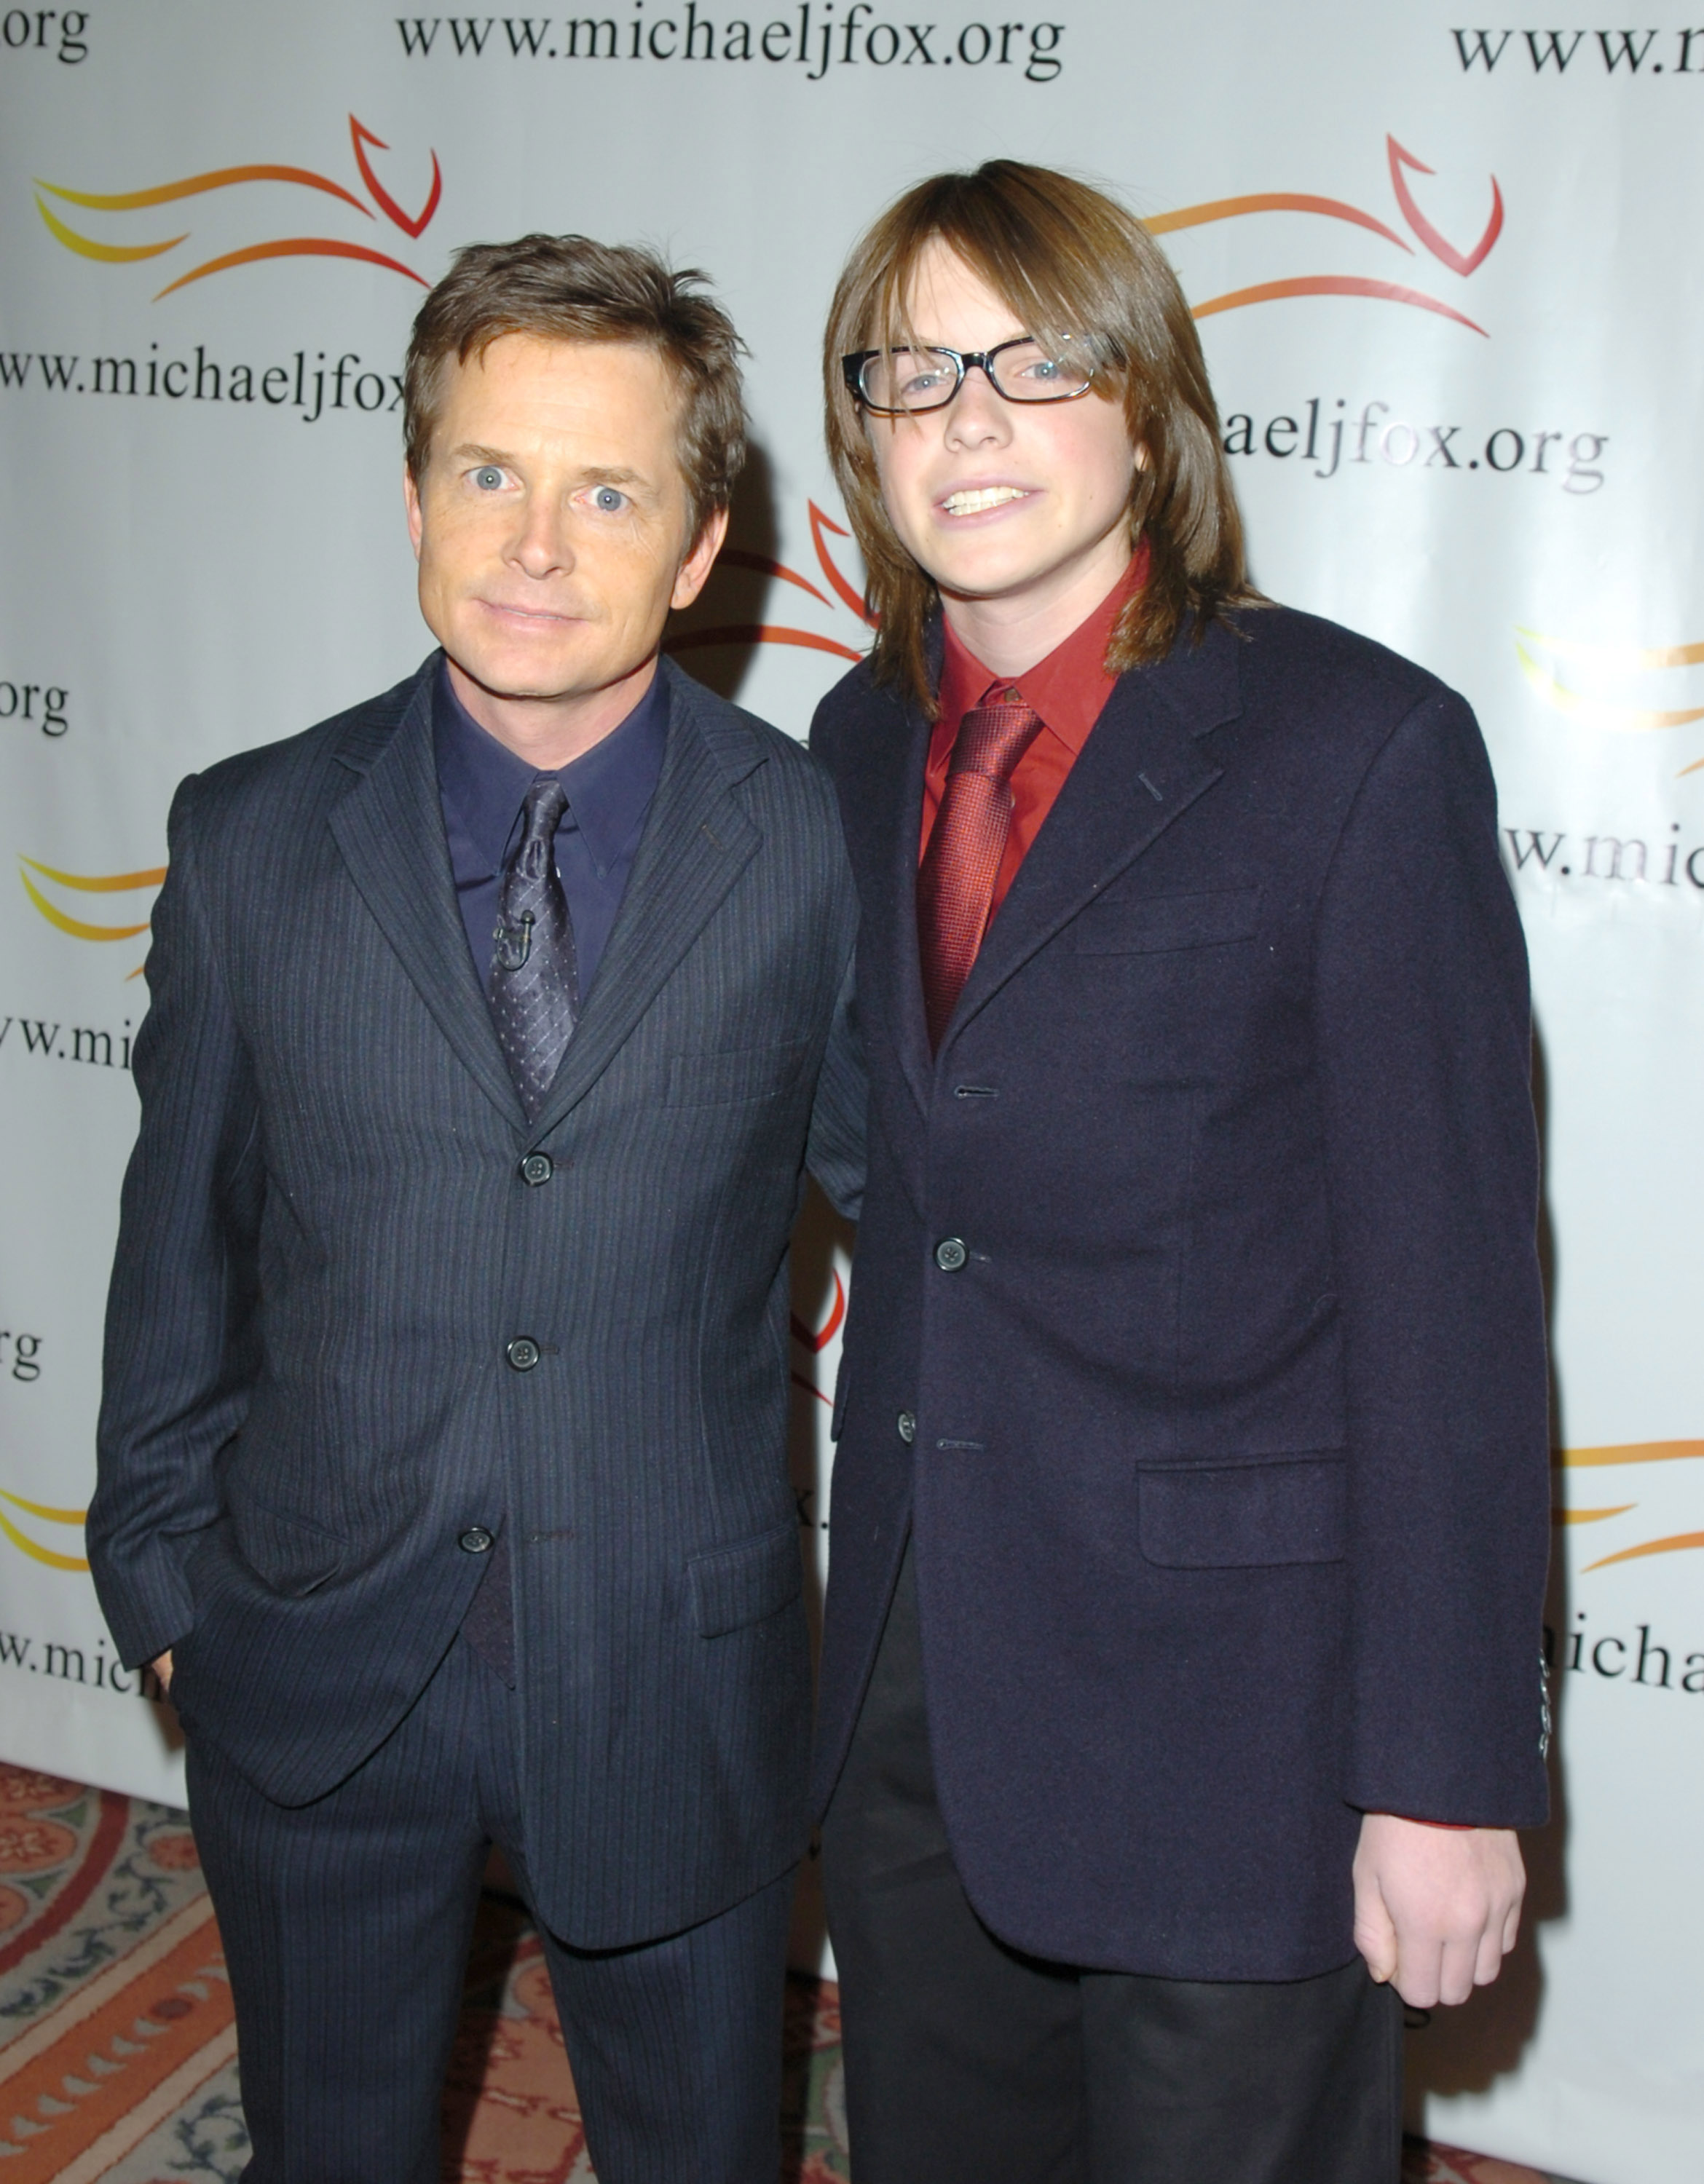 Michael J. Fox and Sam Michael Fox during the "A Funny Thing Happened on the Way to Cure Parkinson's" benefit for The Michael J. Fox Foundation in New York City on November 19, 2005 | Source: Getty Images